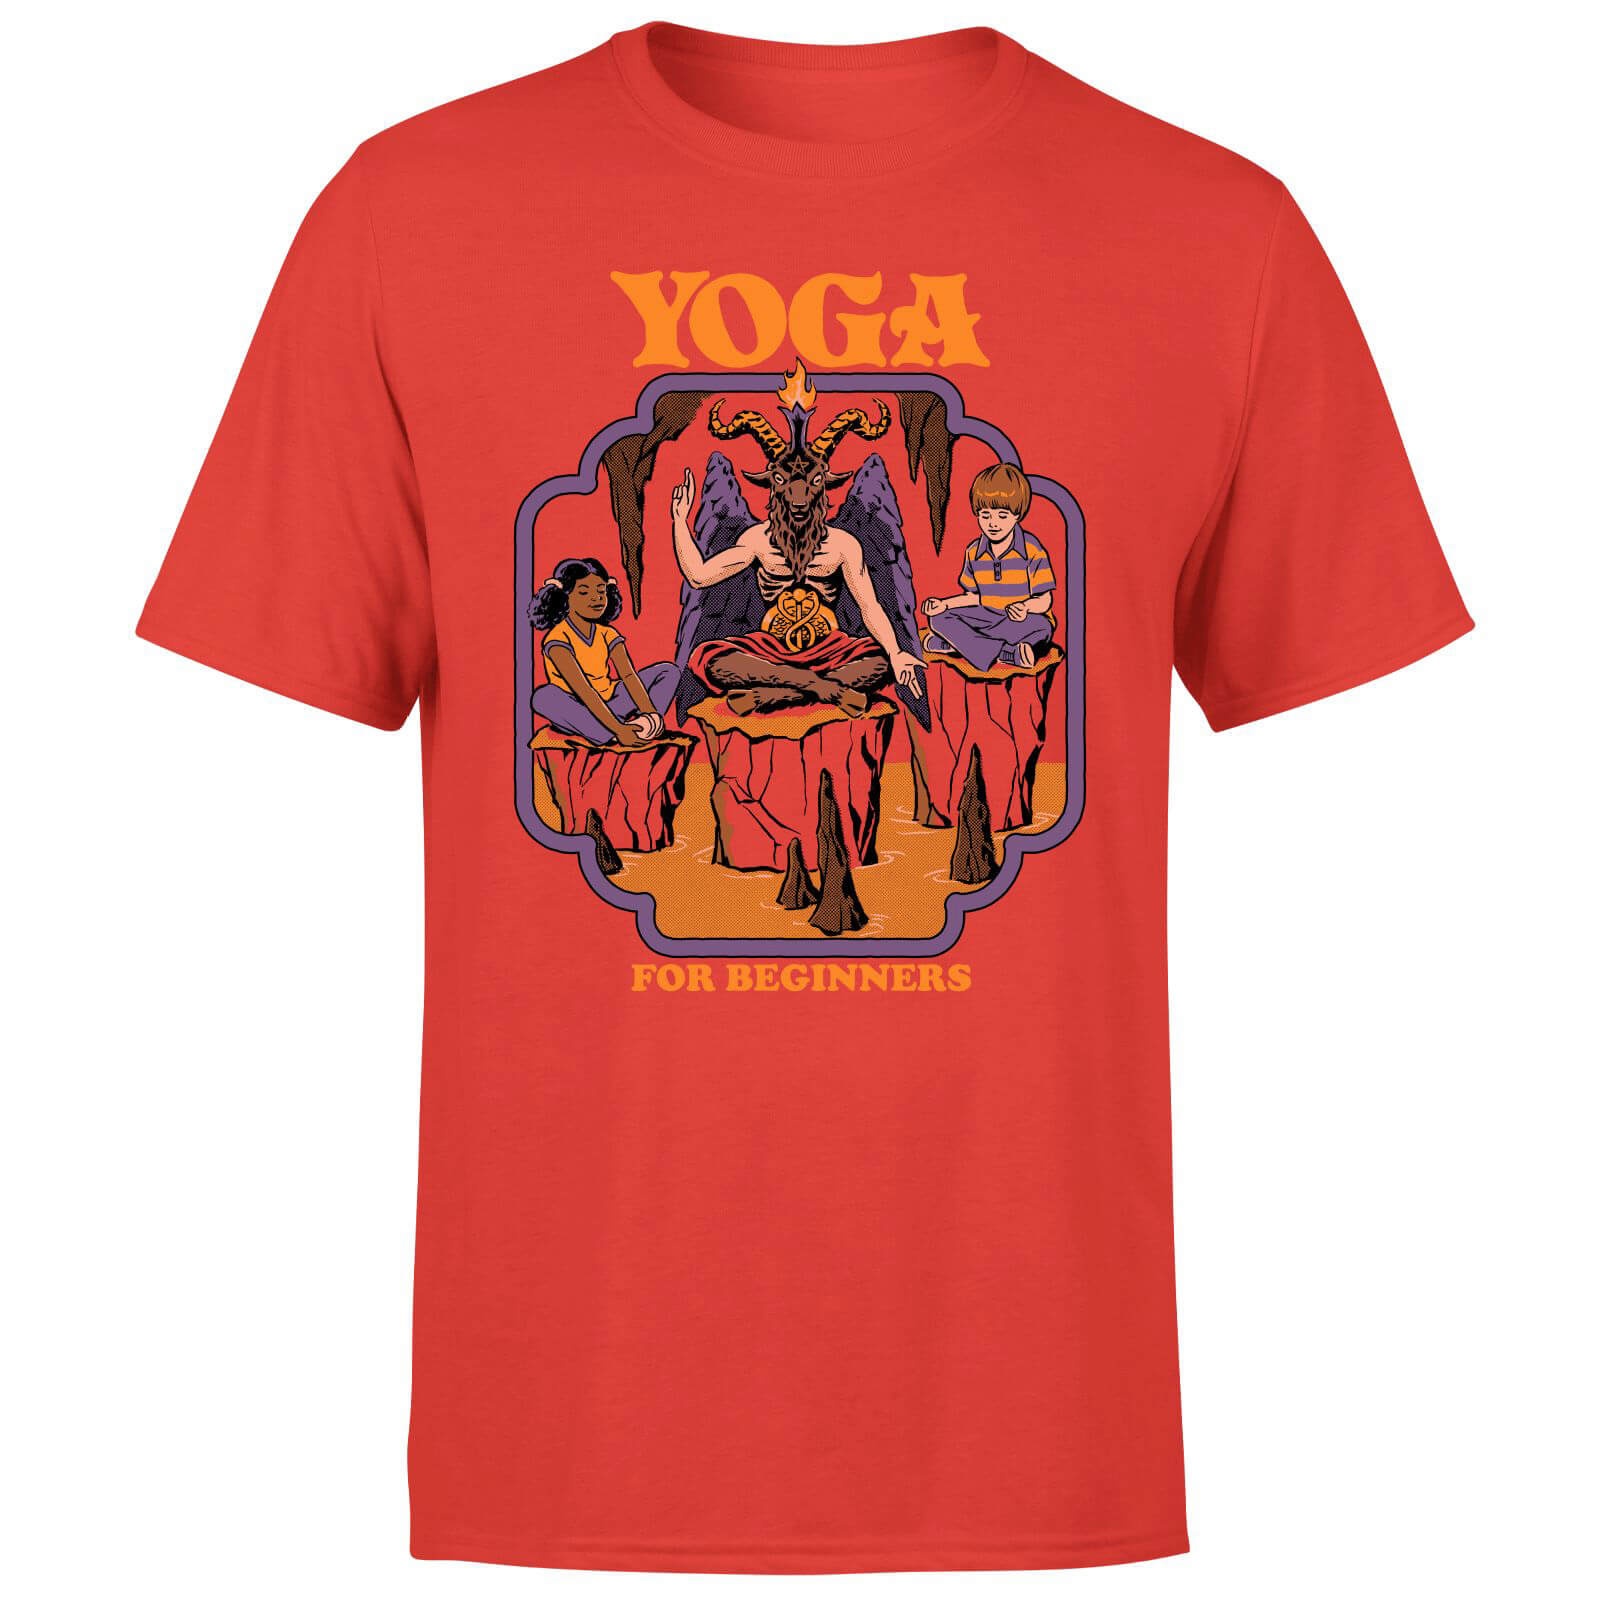 Yoga For Beginners Men's T-Shirt - Red - XS - Rouge